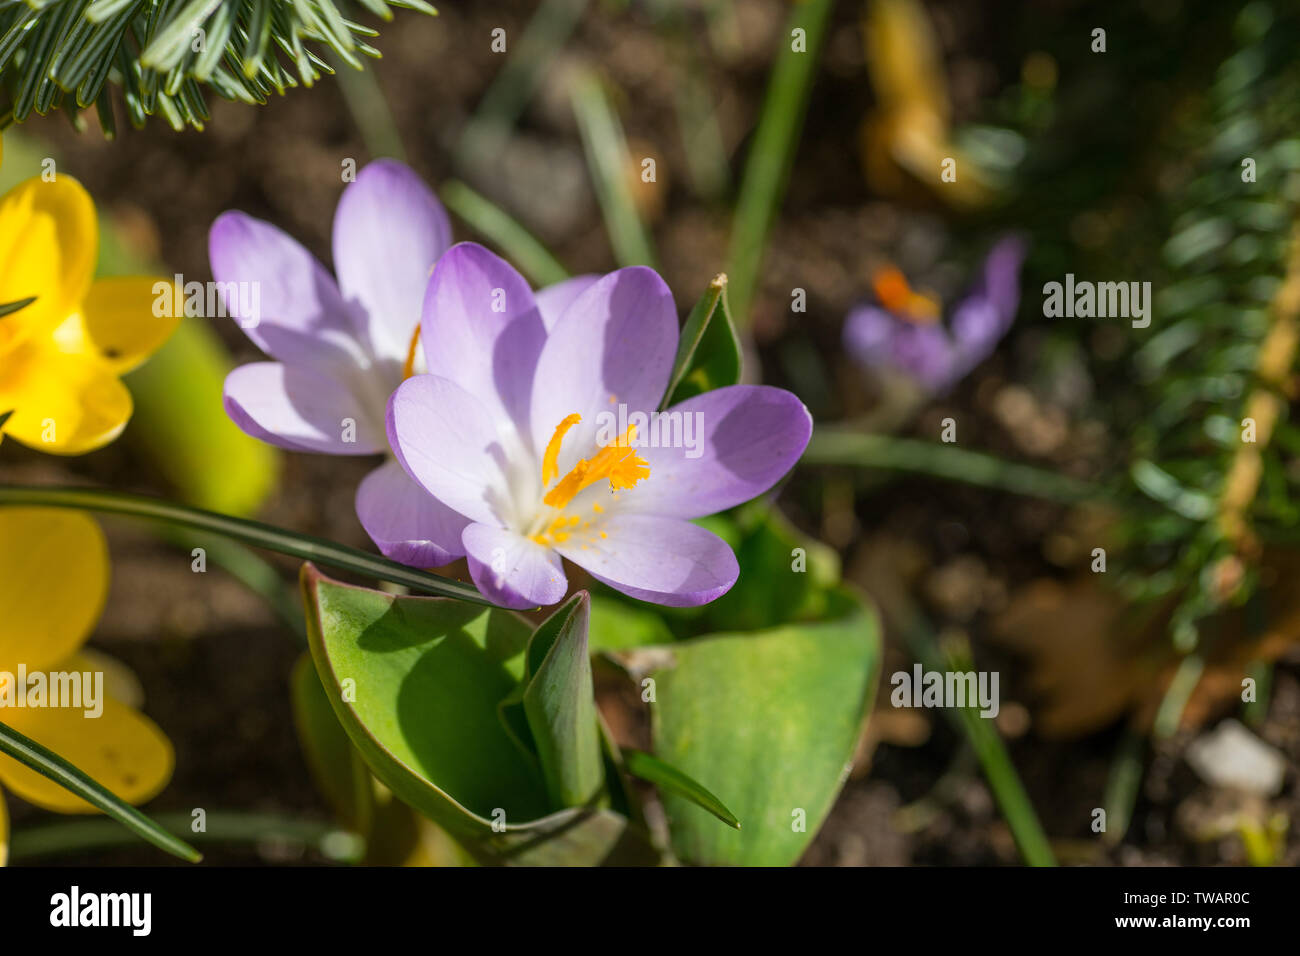 spring has come, anemones and crocuses in full bloom with bright lilac color Stock Photo